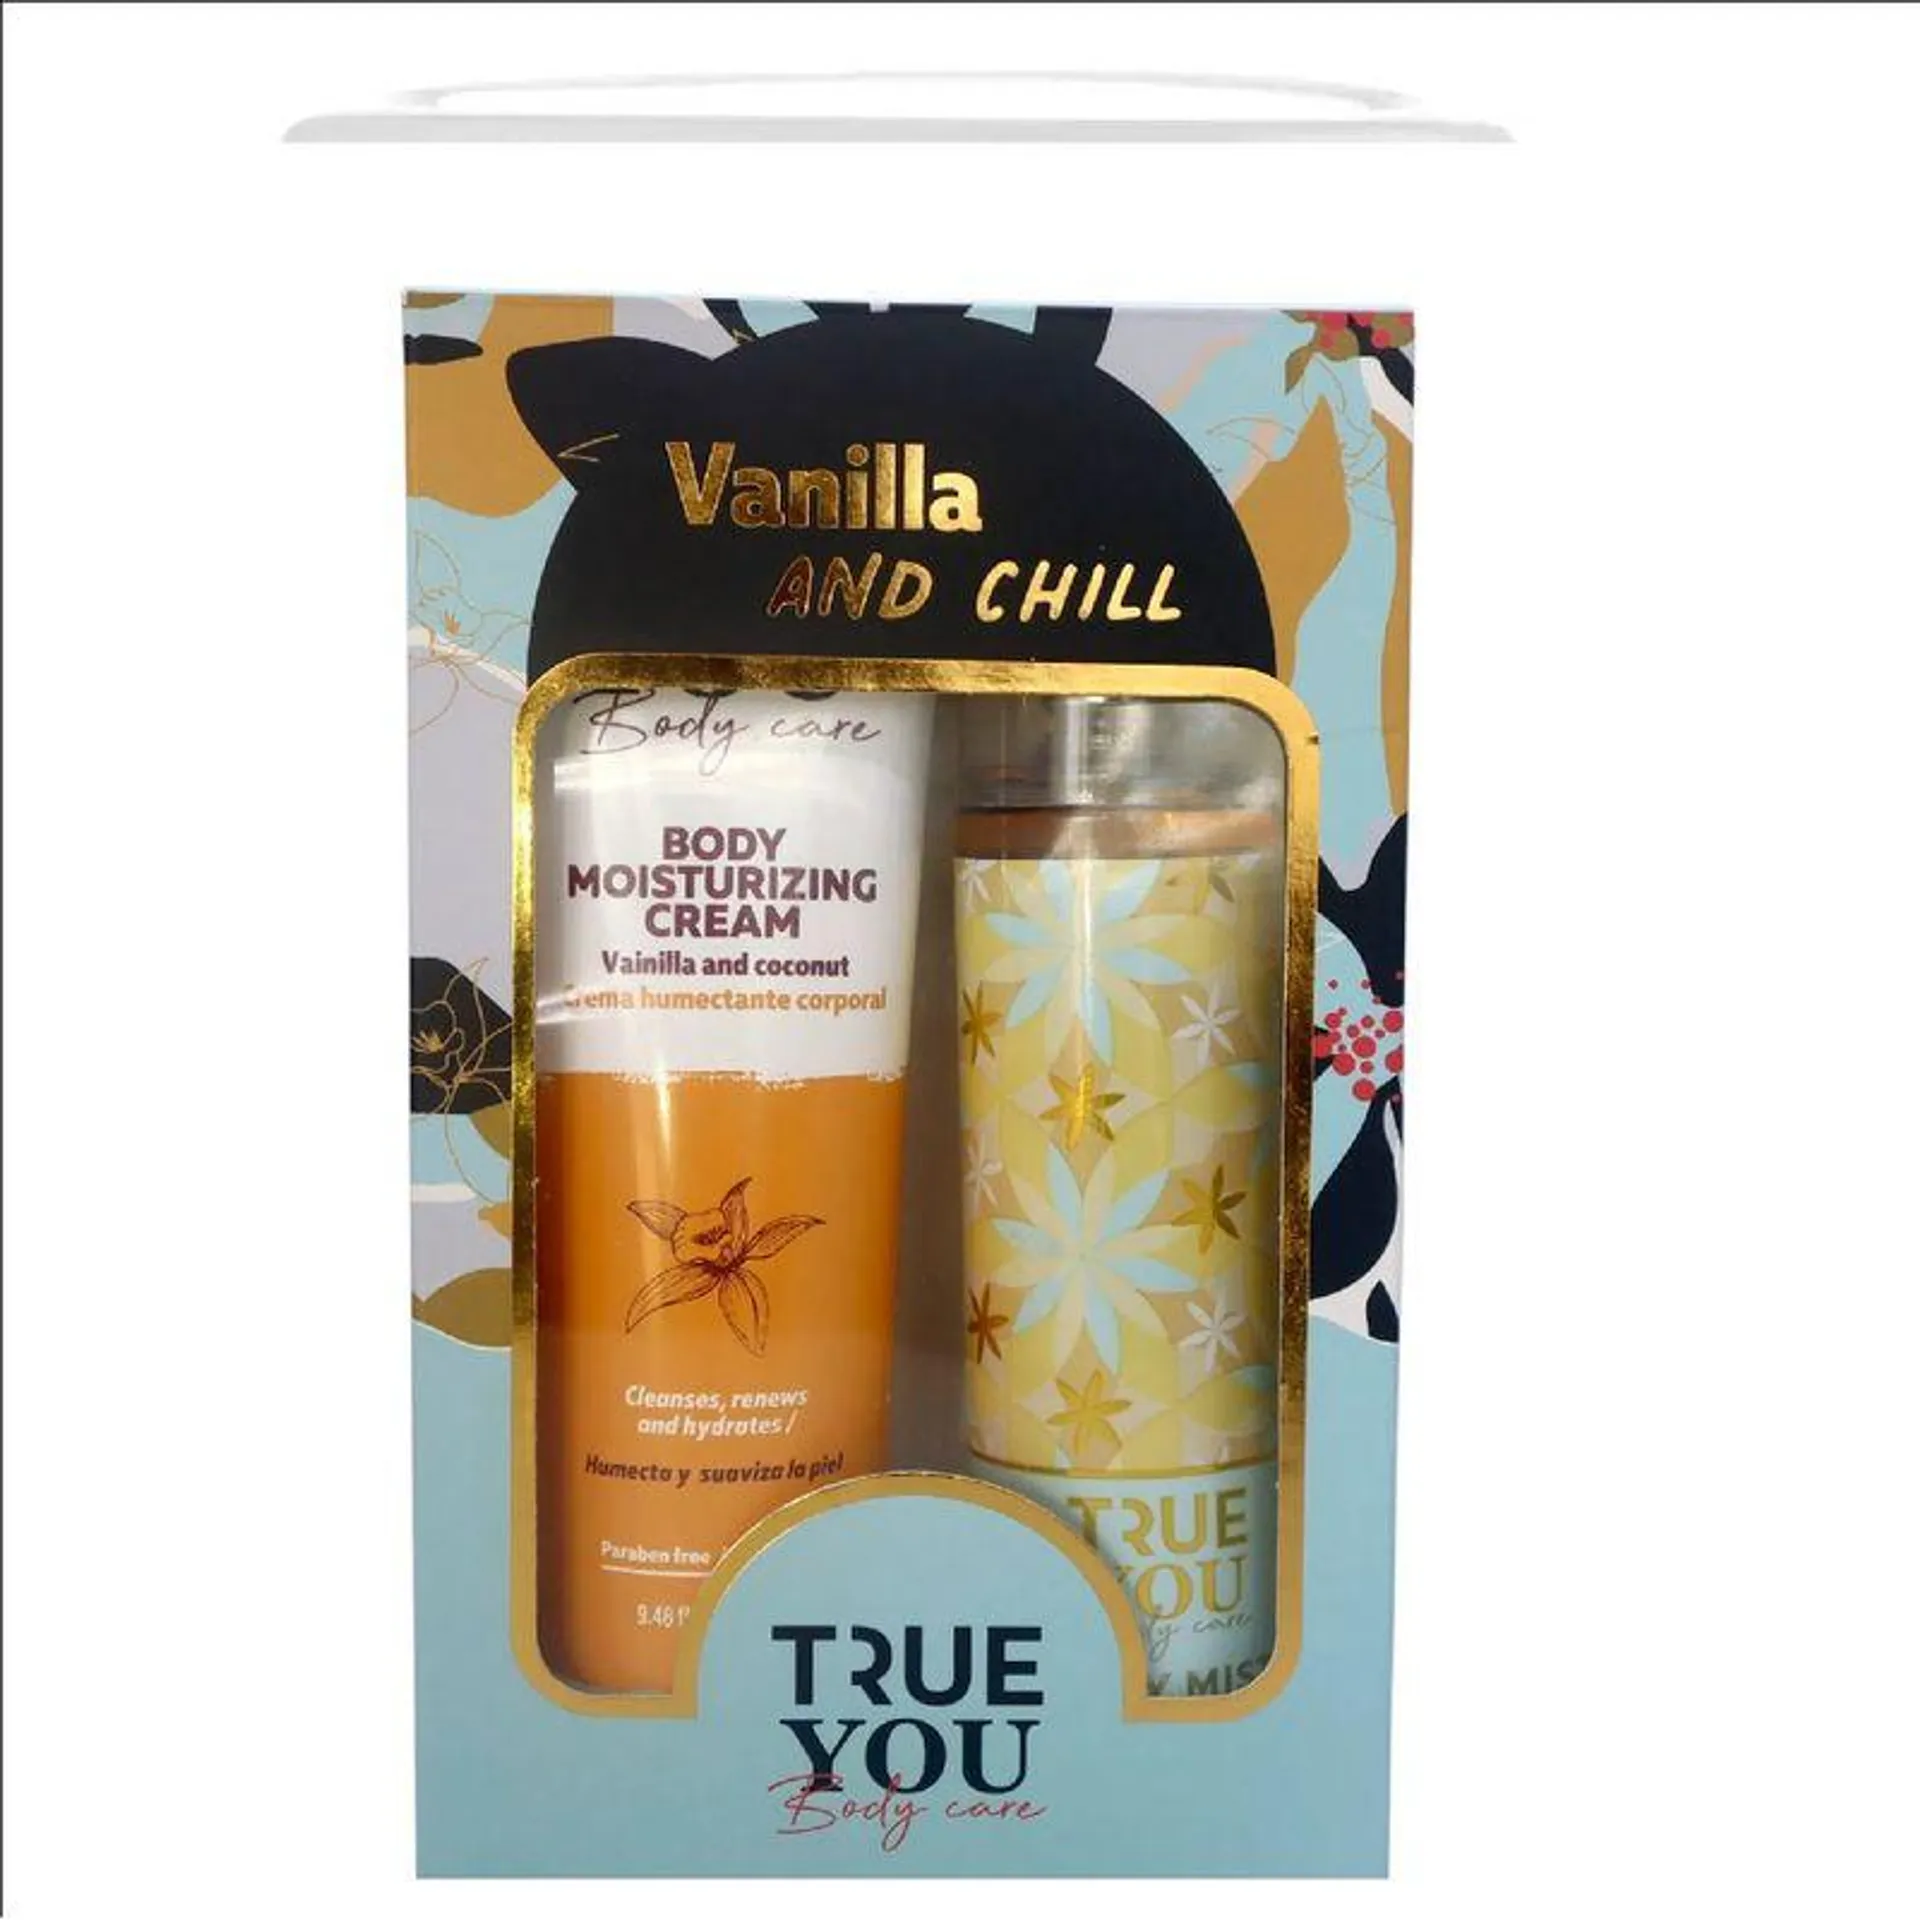 KIT VANILLA AND CHILL TRUE YOU